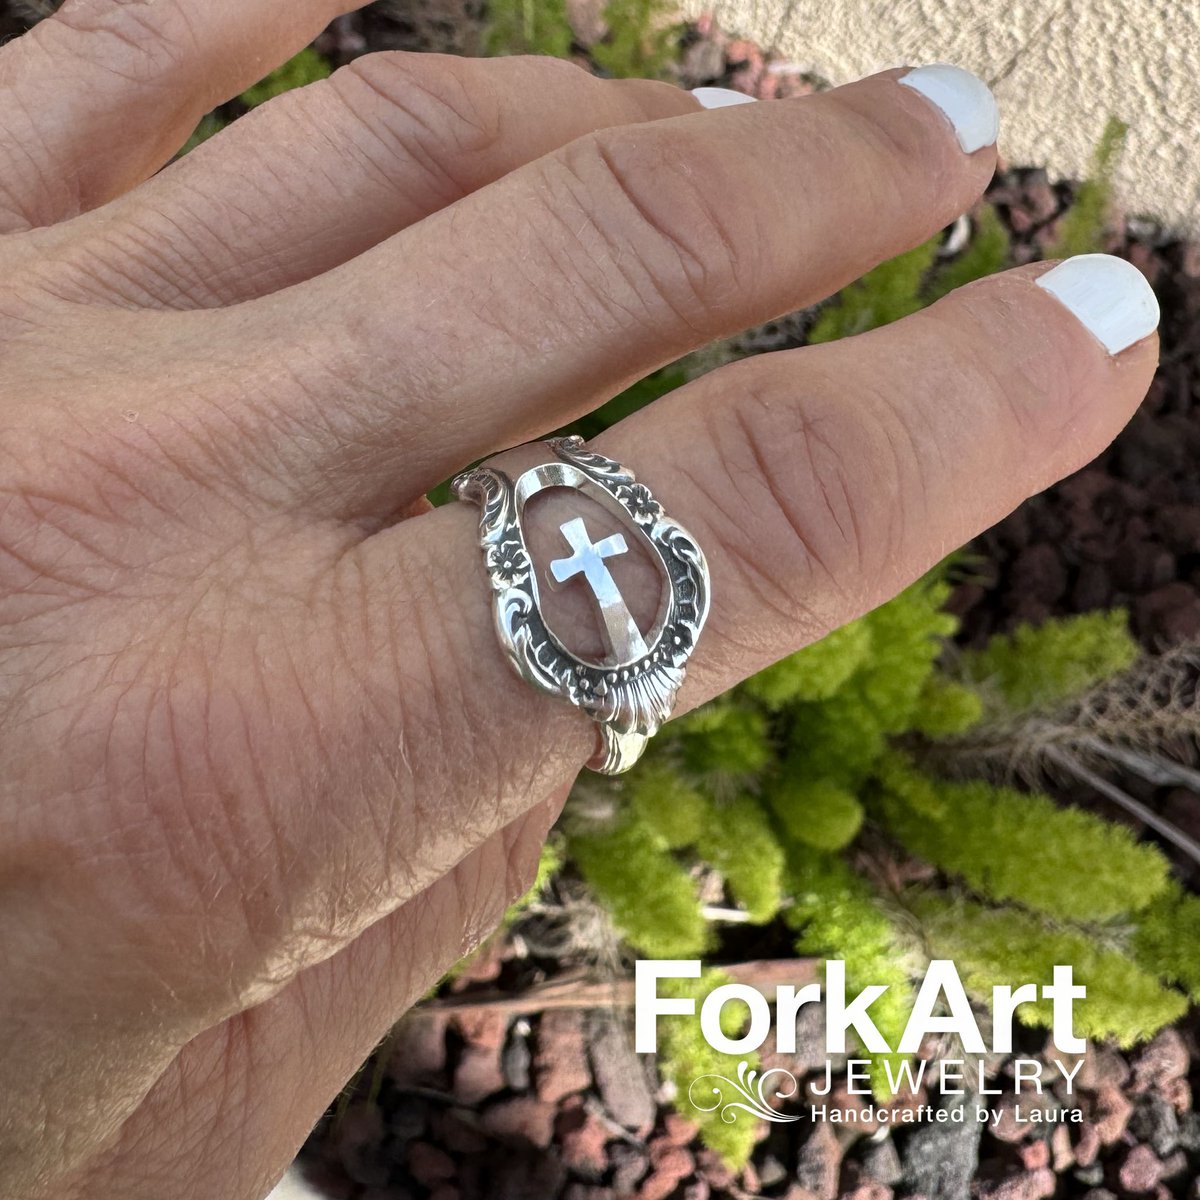 A customer who purchased one of my hand-cut sterling silver cross pendants asked if I could make one into a ring for her. Love the detail on the spoon! What do you think?
.
.
.
#crossring #crosssterlingring #spoonring #spoonjewelry #forkartjewelry